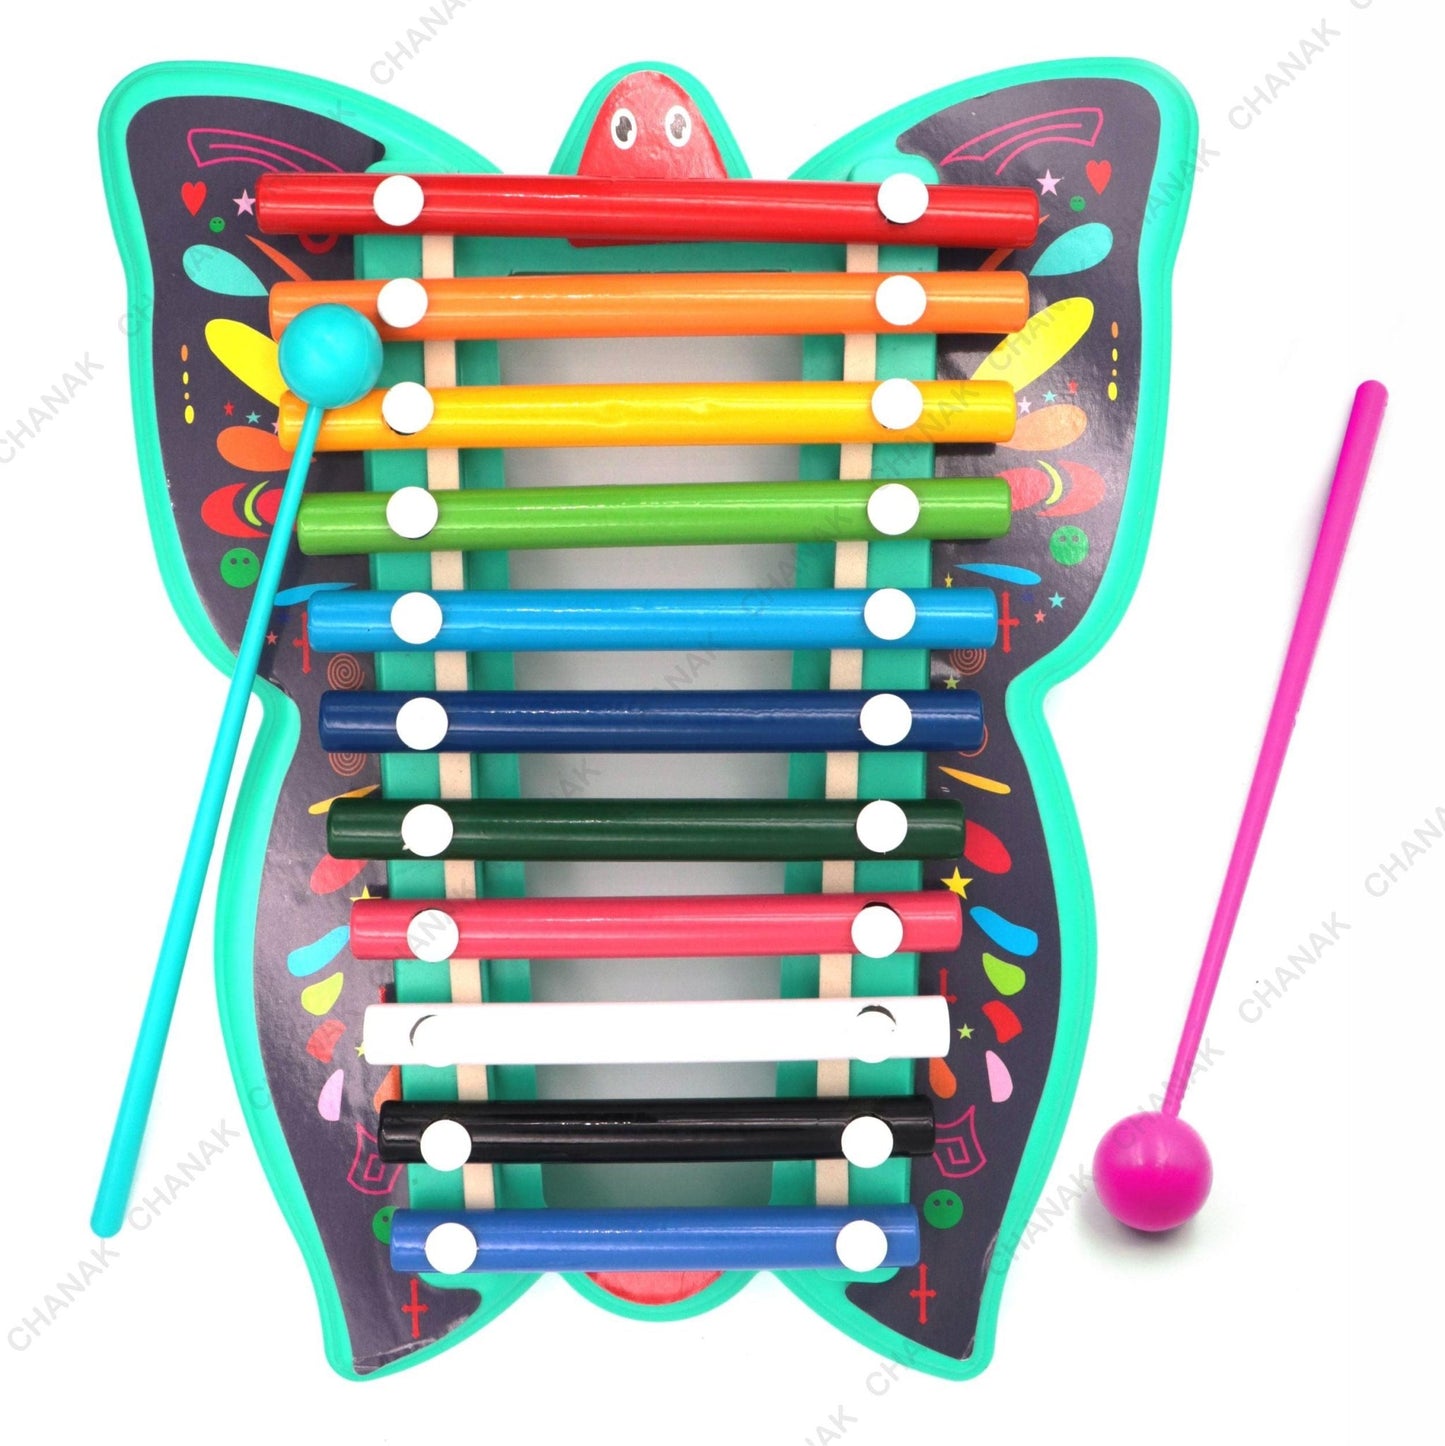 Chanak Musical Butterfly Xylophone Toy (Blue) - chanak